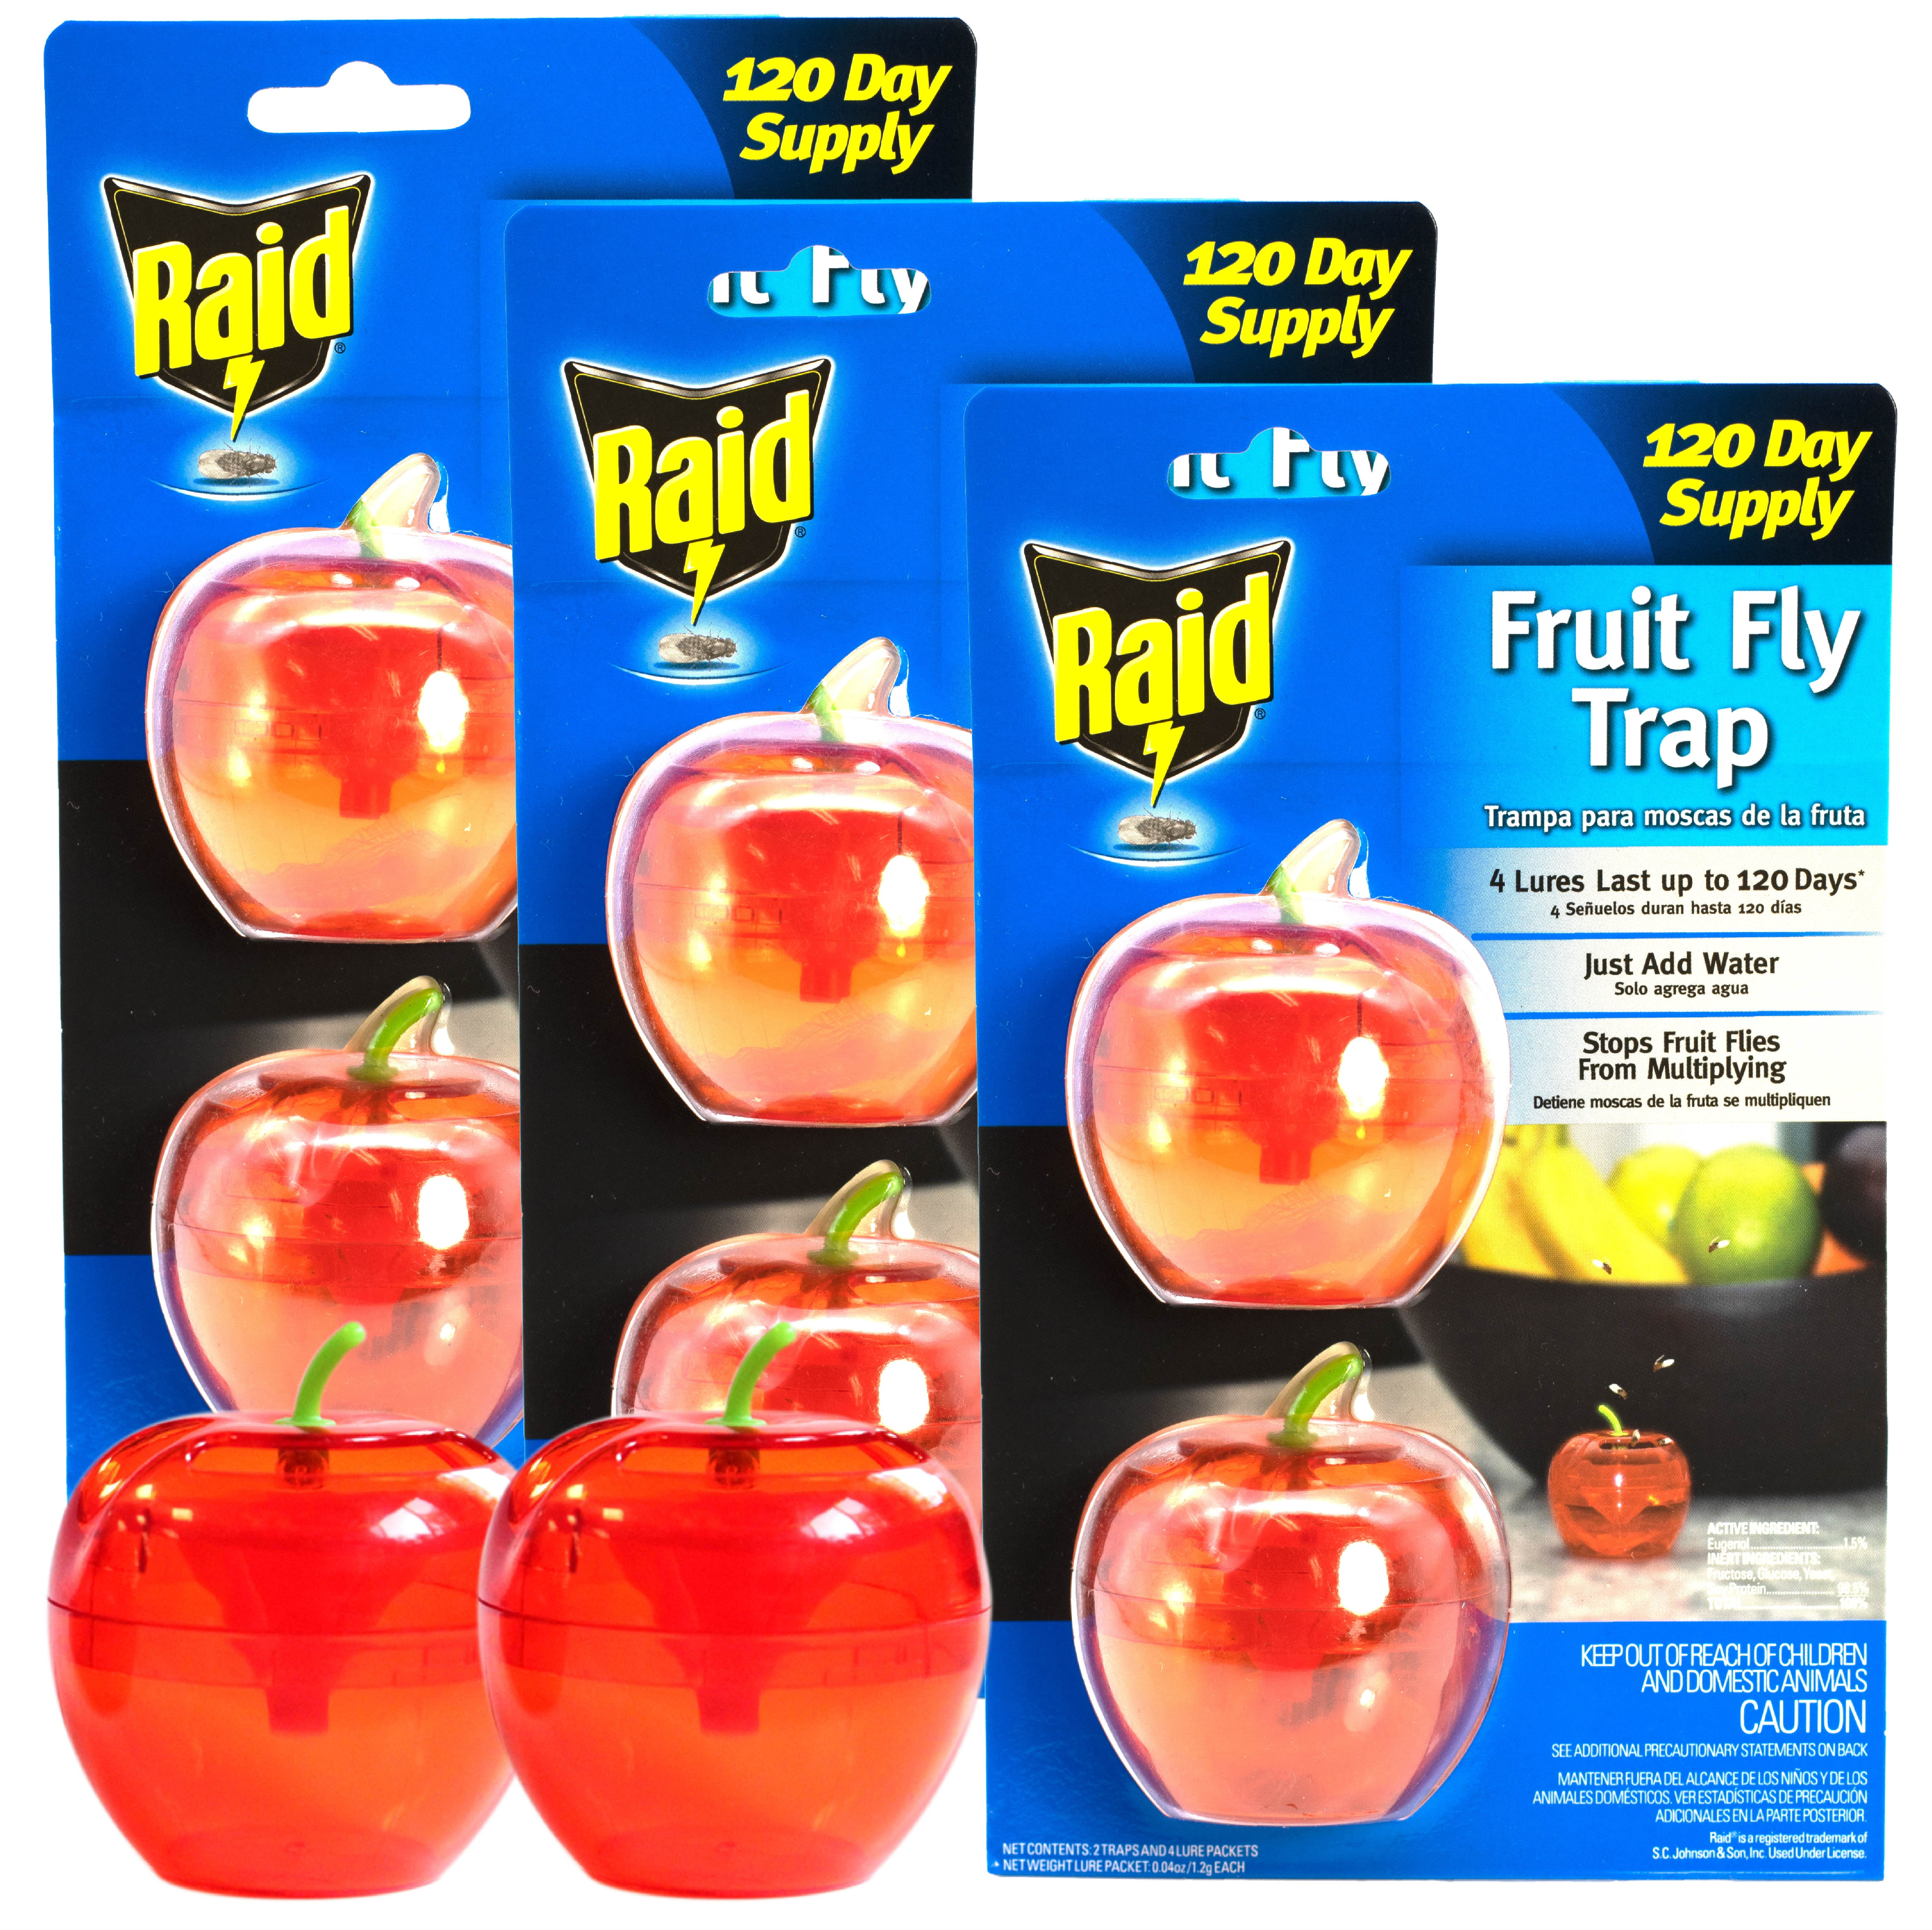 3cps New Fruit Fly Trap, Fly Trap, Fly Trap, Flying Insect Trap